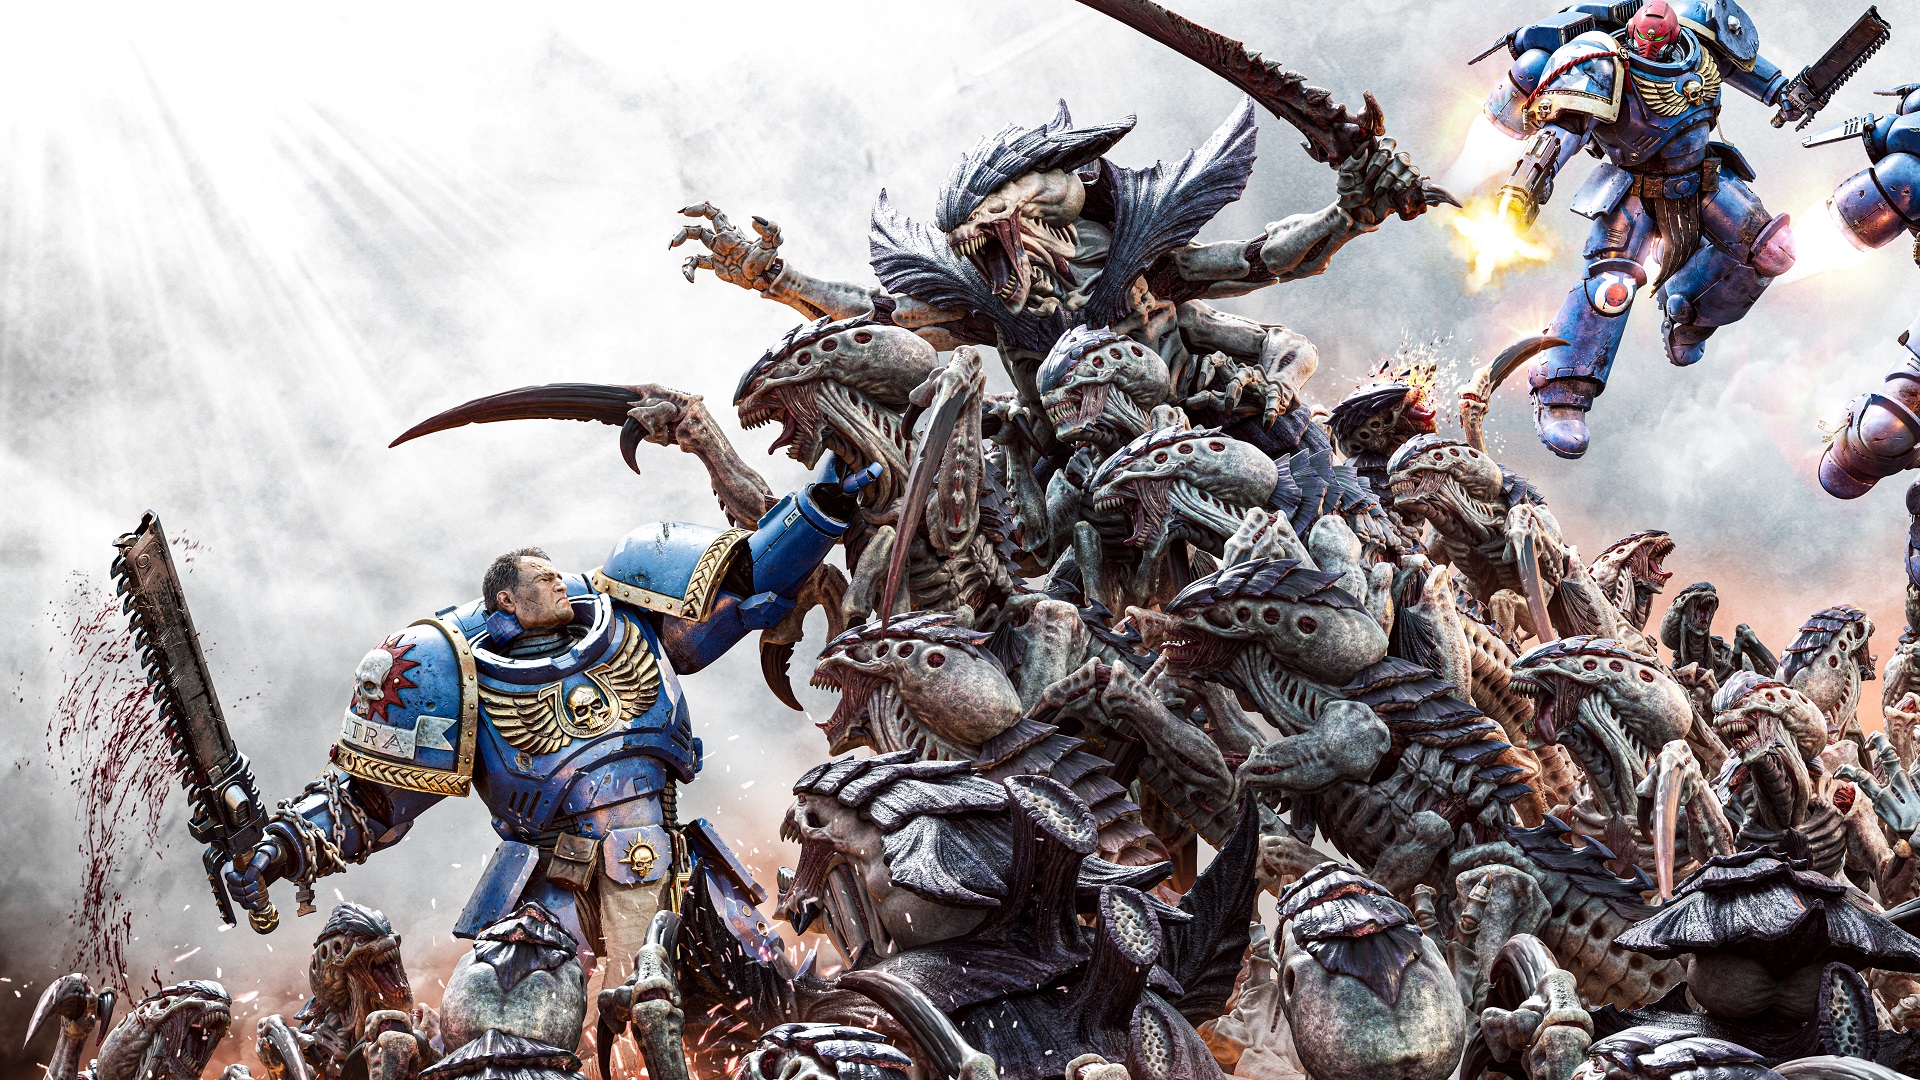 Warhammer 40k Space Marine 2 release date, story, latest news